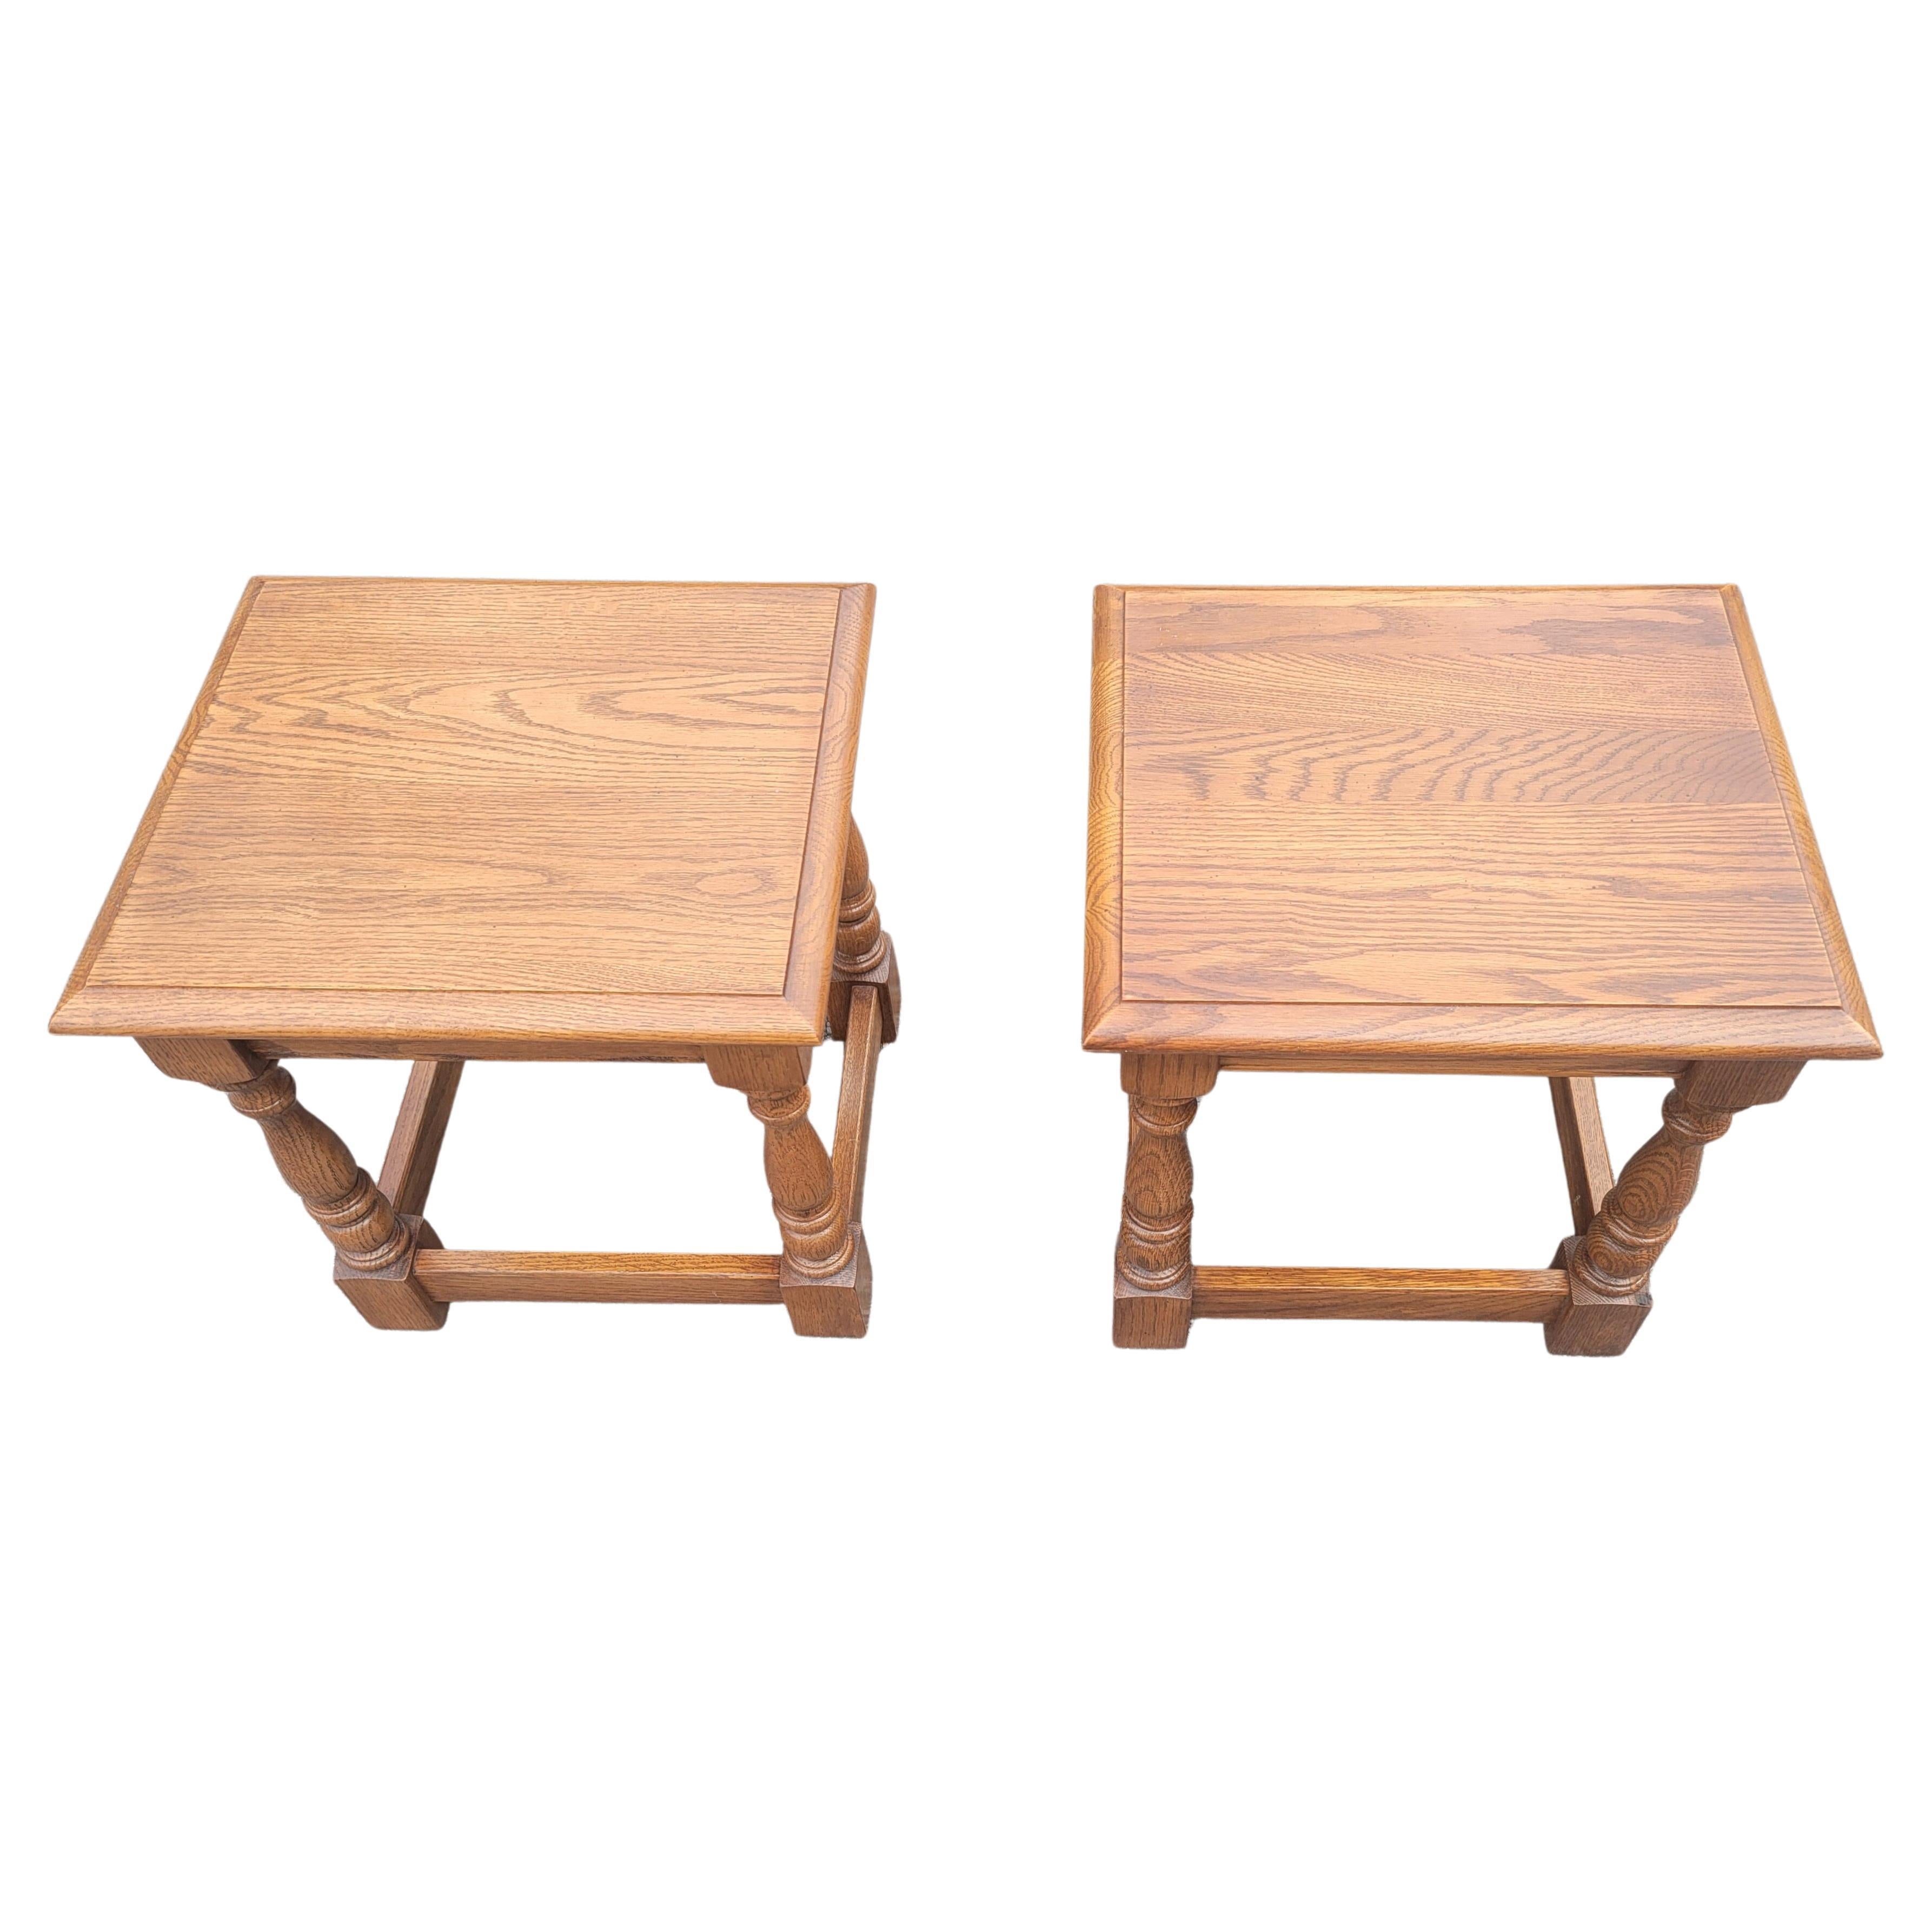 American Country View Amish Handcrafted Mission Oak Low Stools For Sale